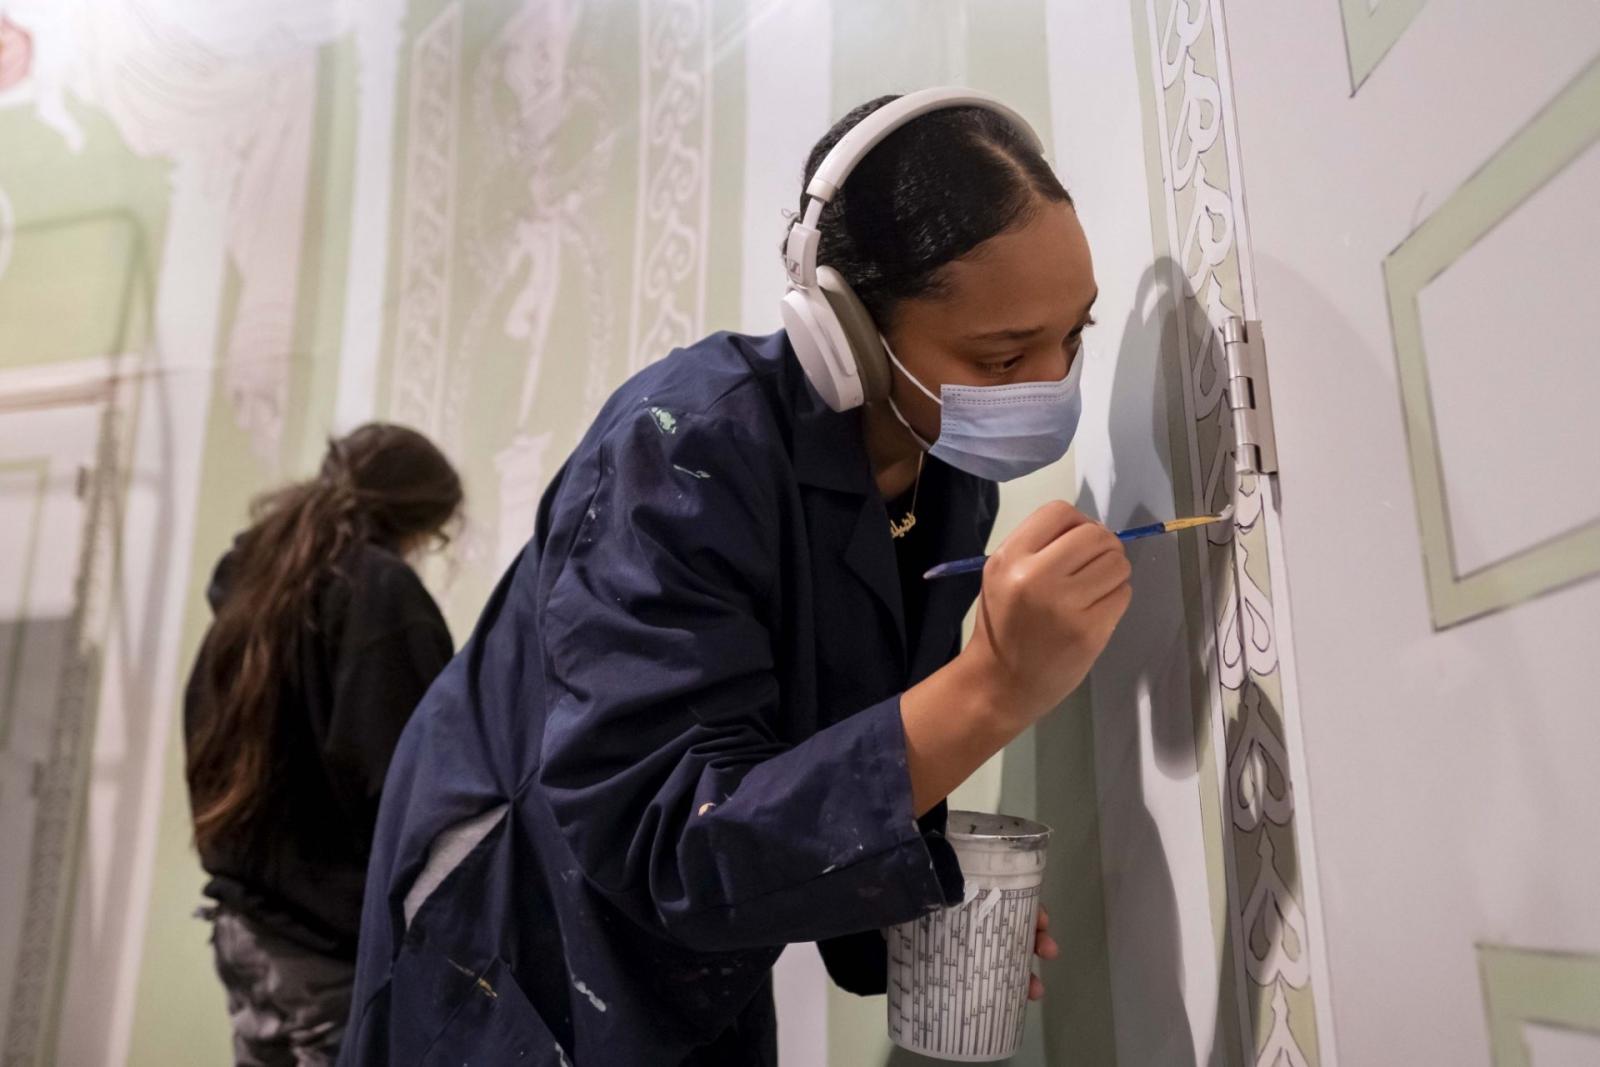 Student wearing headphones and painter's coveralls paints details onto a doorframe while holding a small cup of paint.